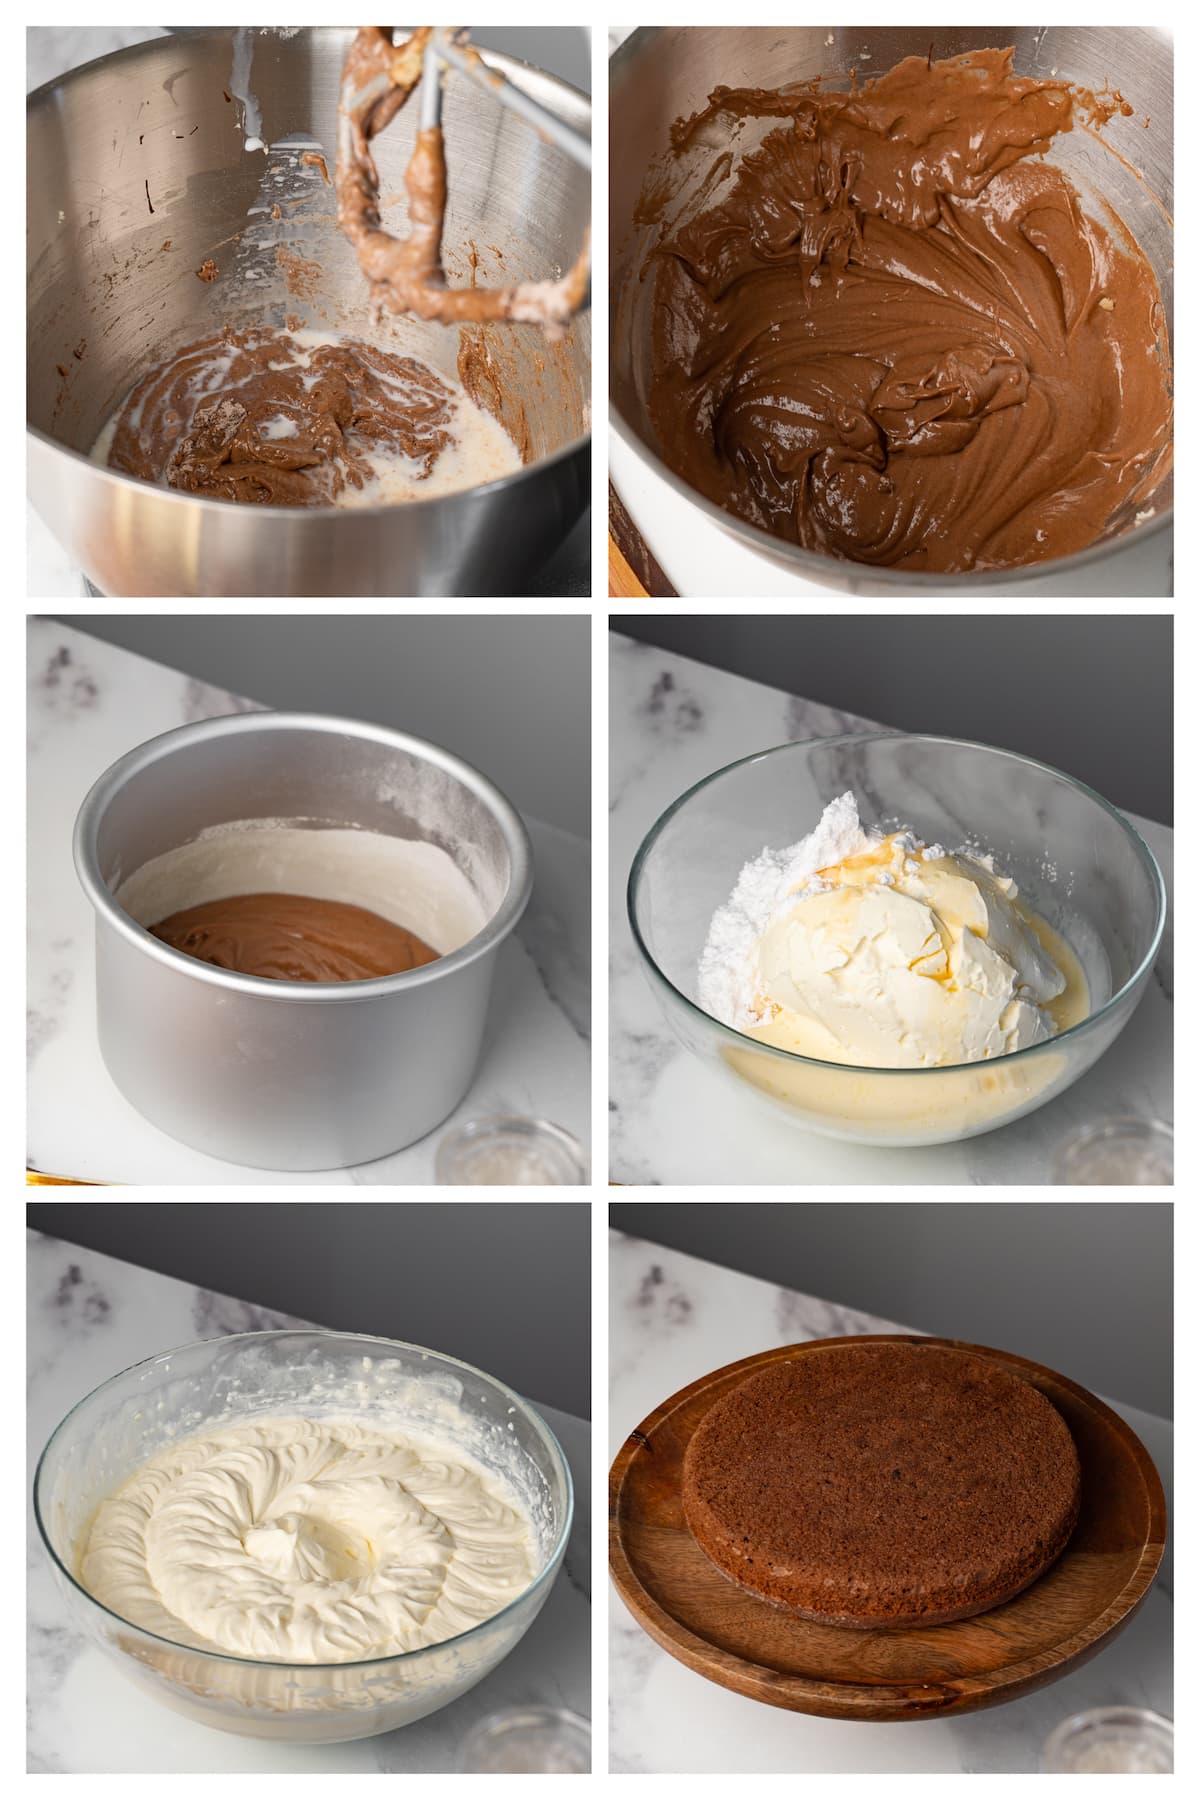 The collage image shows six steps to make chocolate cake layers and white cream cheese frosting to assemble the cake.